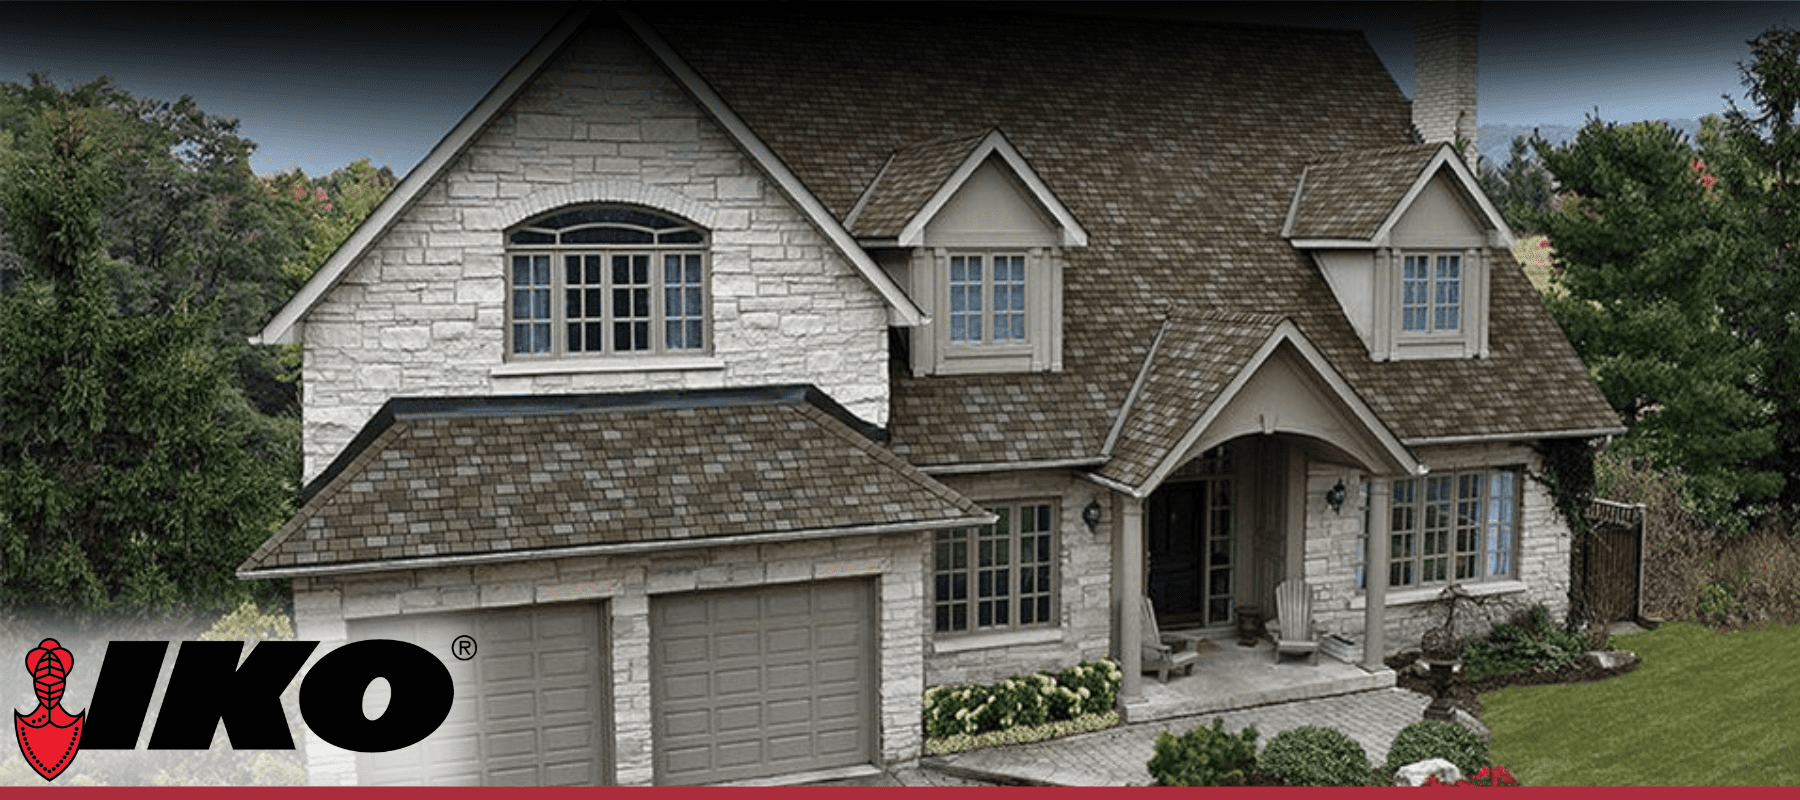 IKO Roofing and Shingles Available at Gilford Home Center